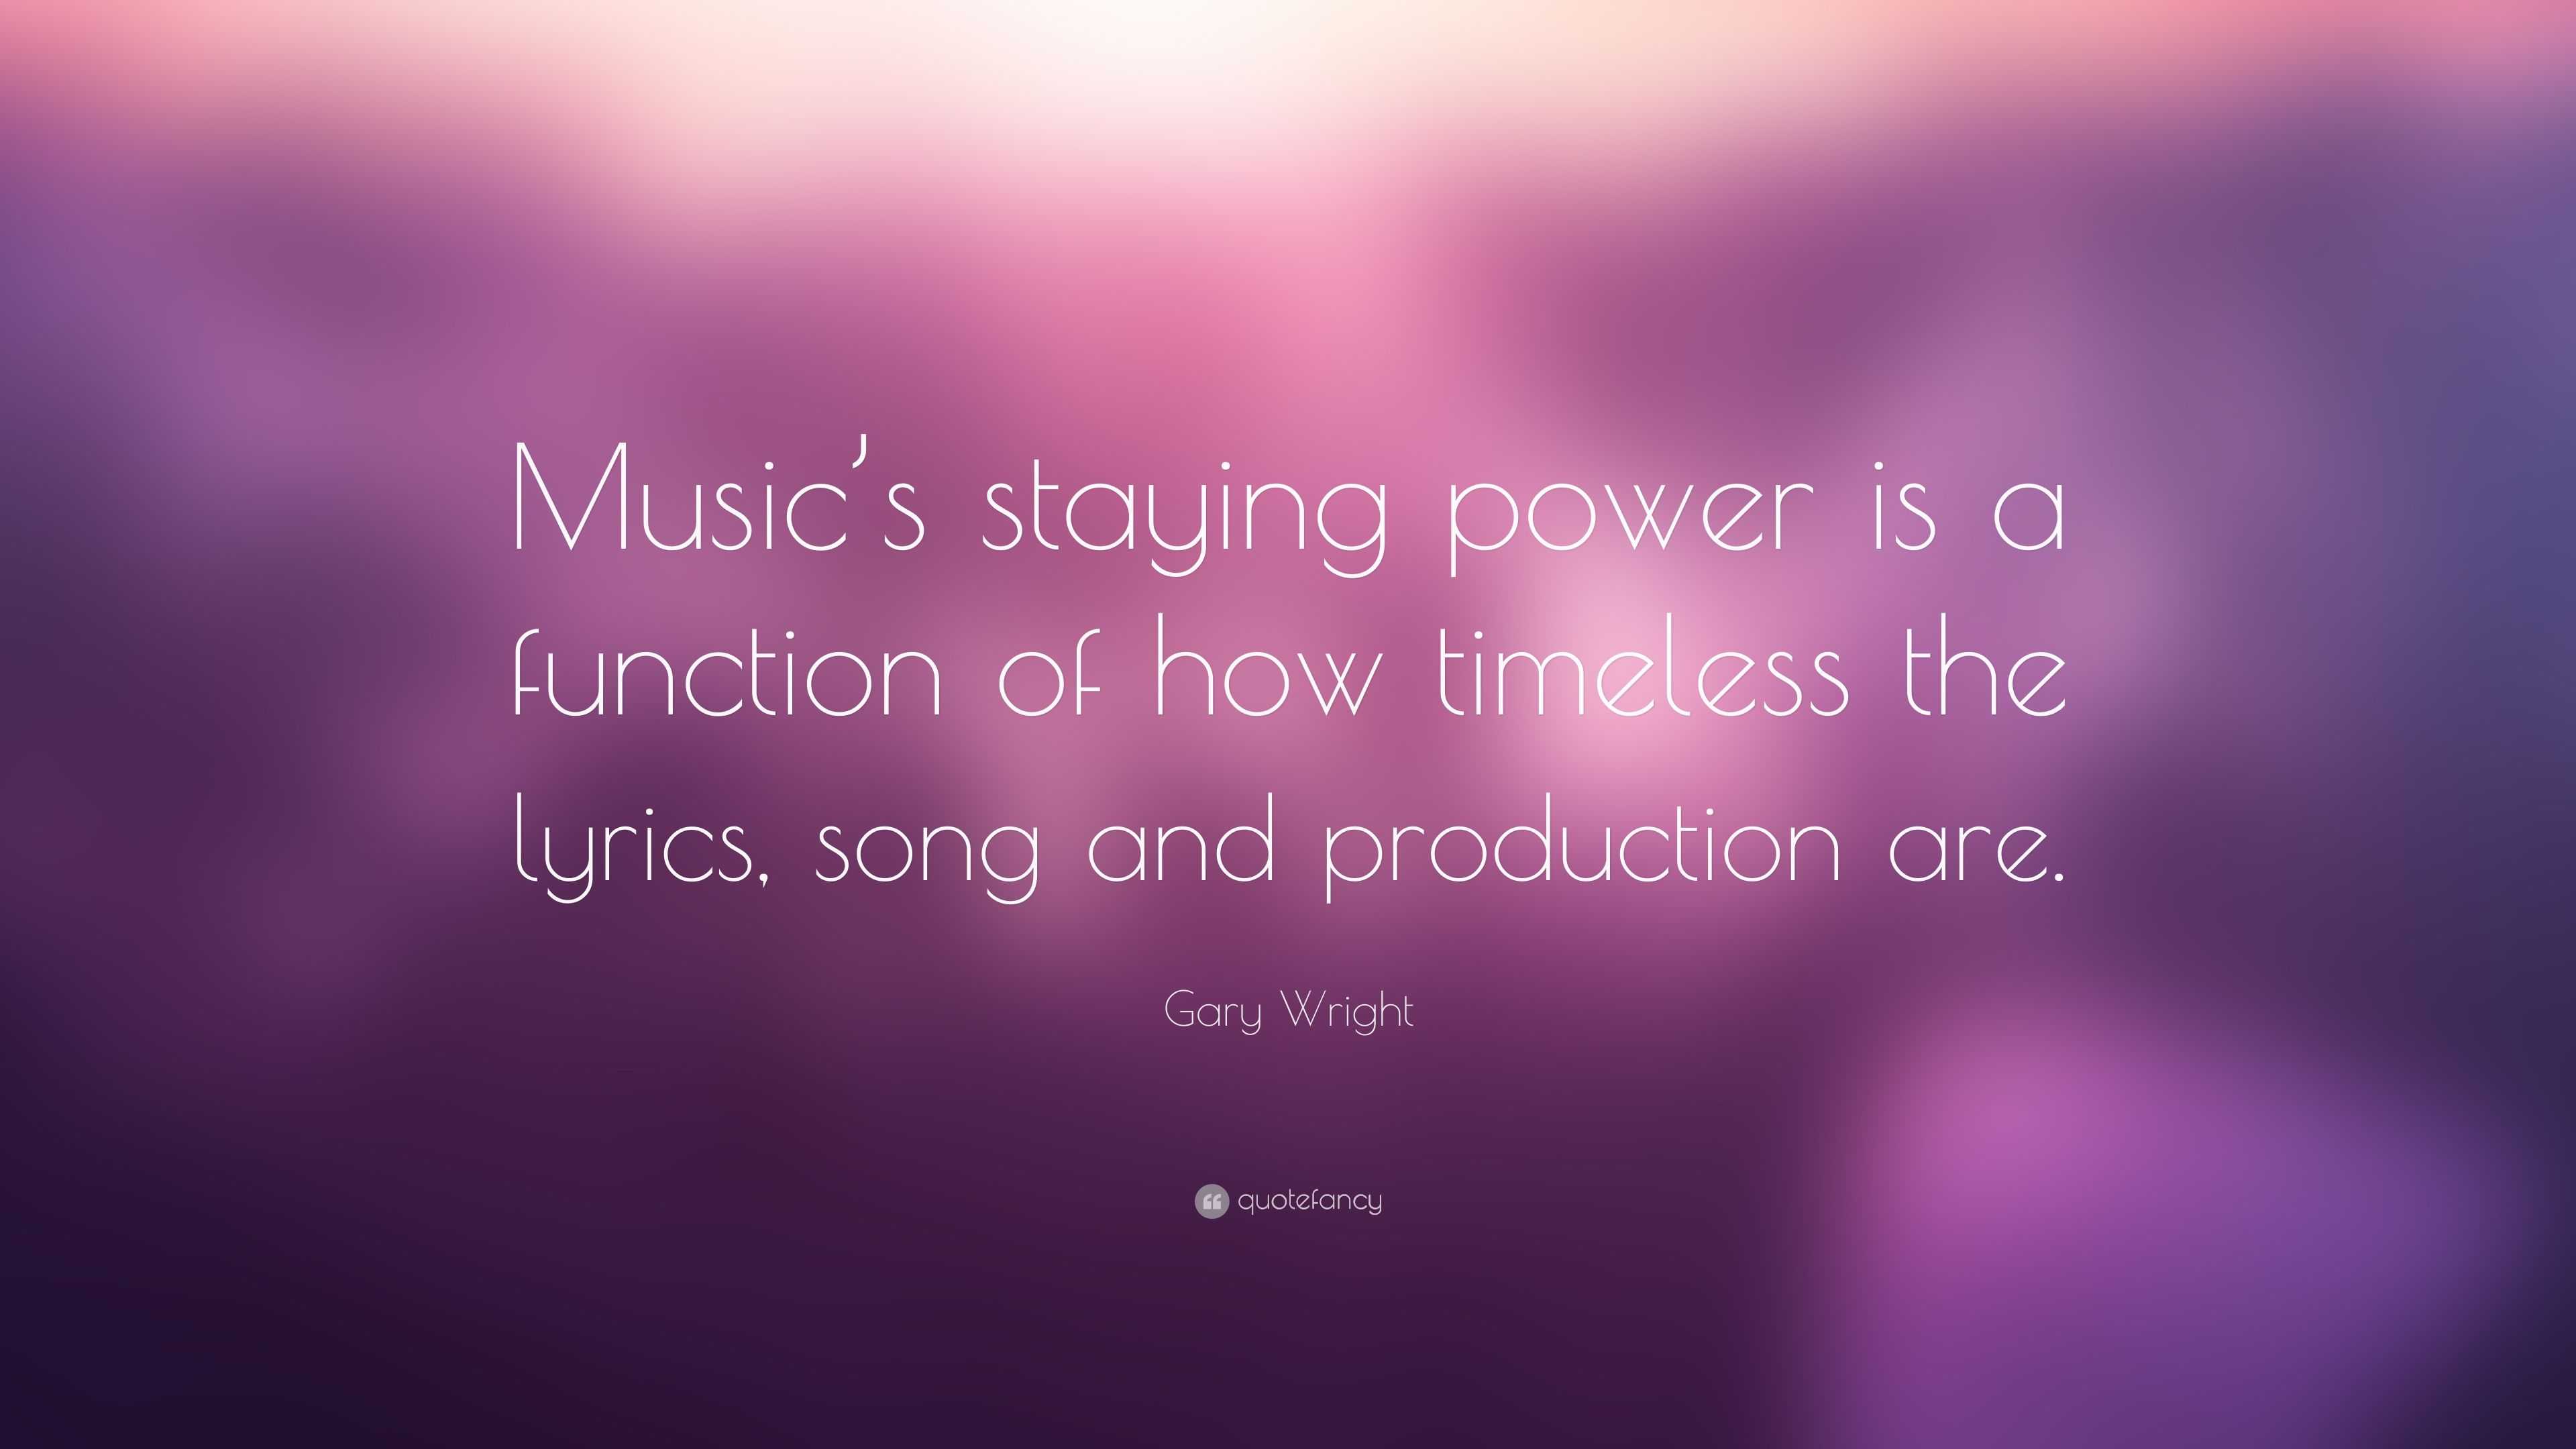 Gary Wright Quote: “Music's staying power is a function of how